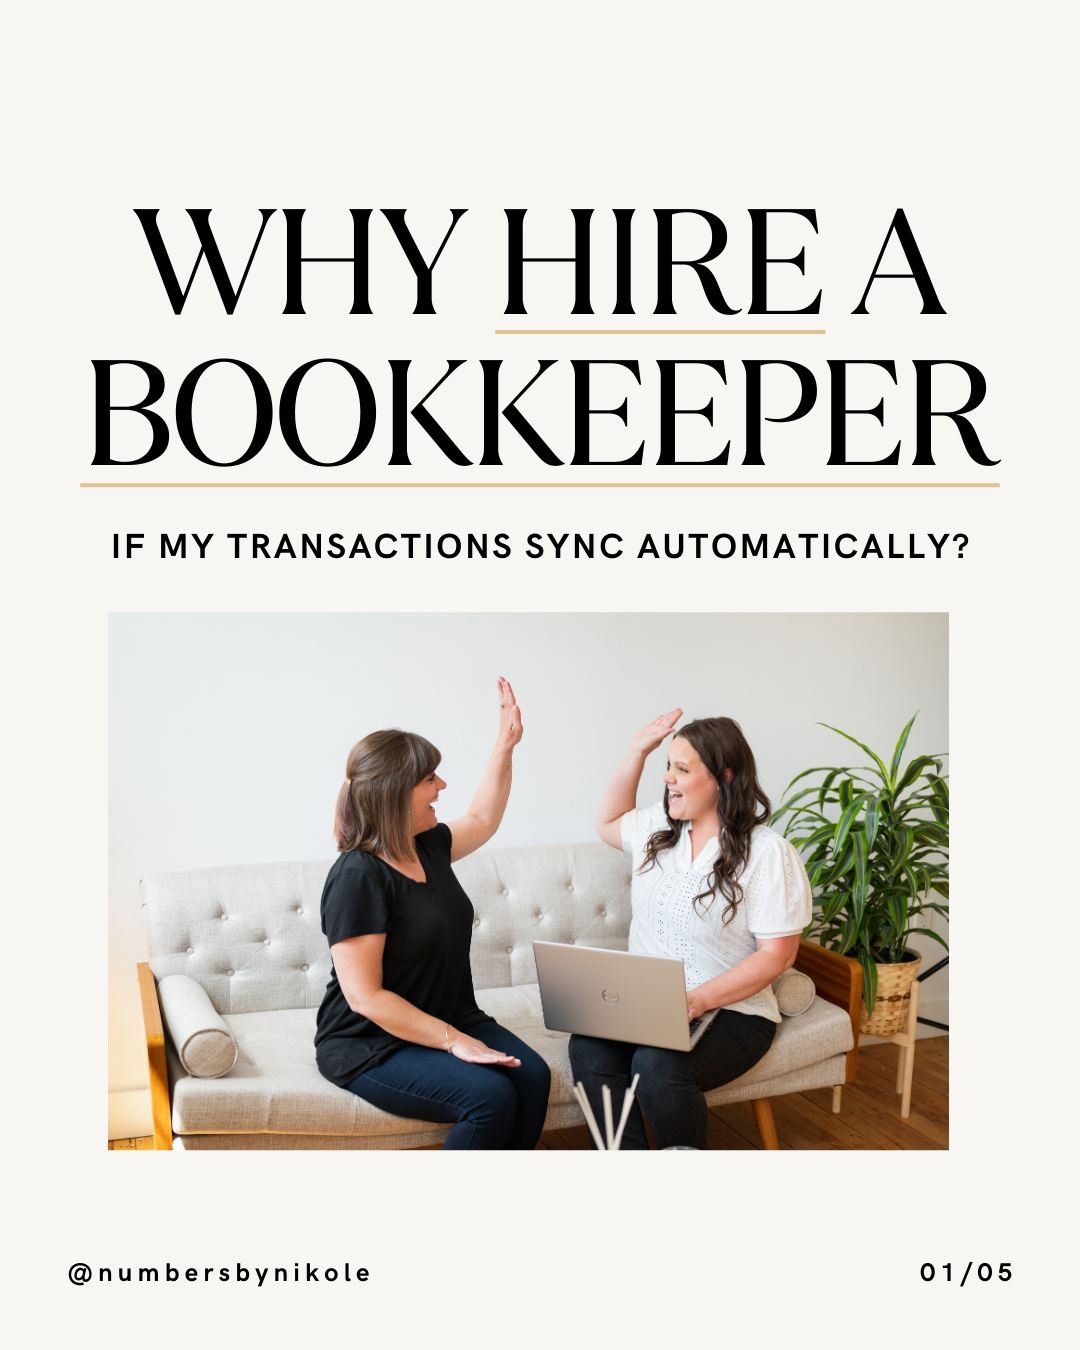 This is a SUPER valid question: 

If my bank accounts are connected to my bookkeeping software automatically, do I even need a bookkeeper?

YES, and here's why:

Getting all of your transactions entered into your software is a big first step, but boo